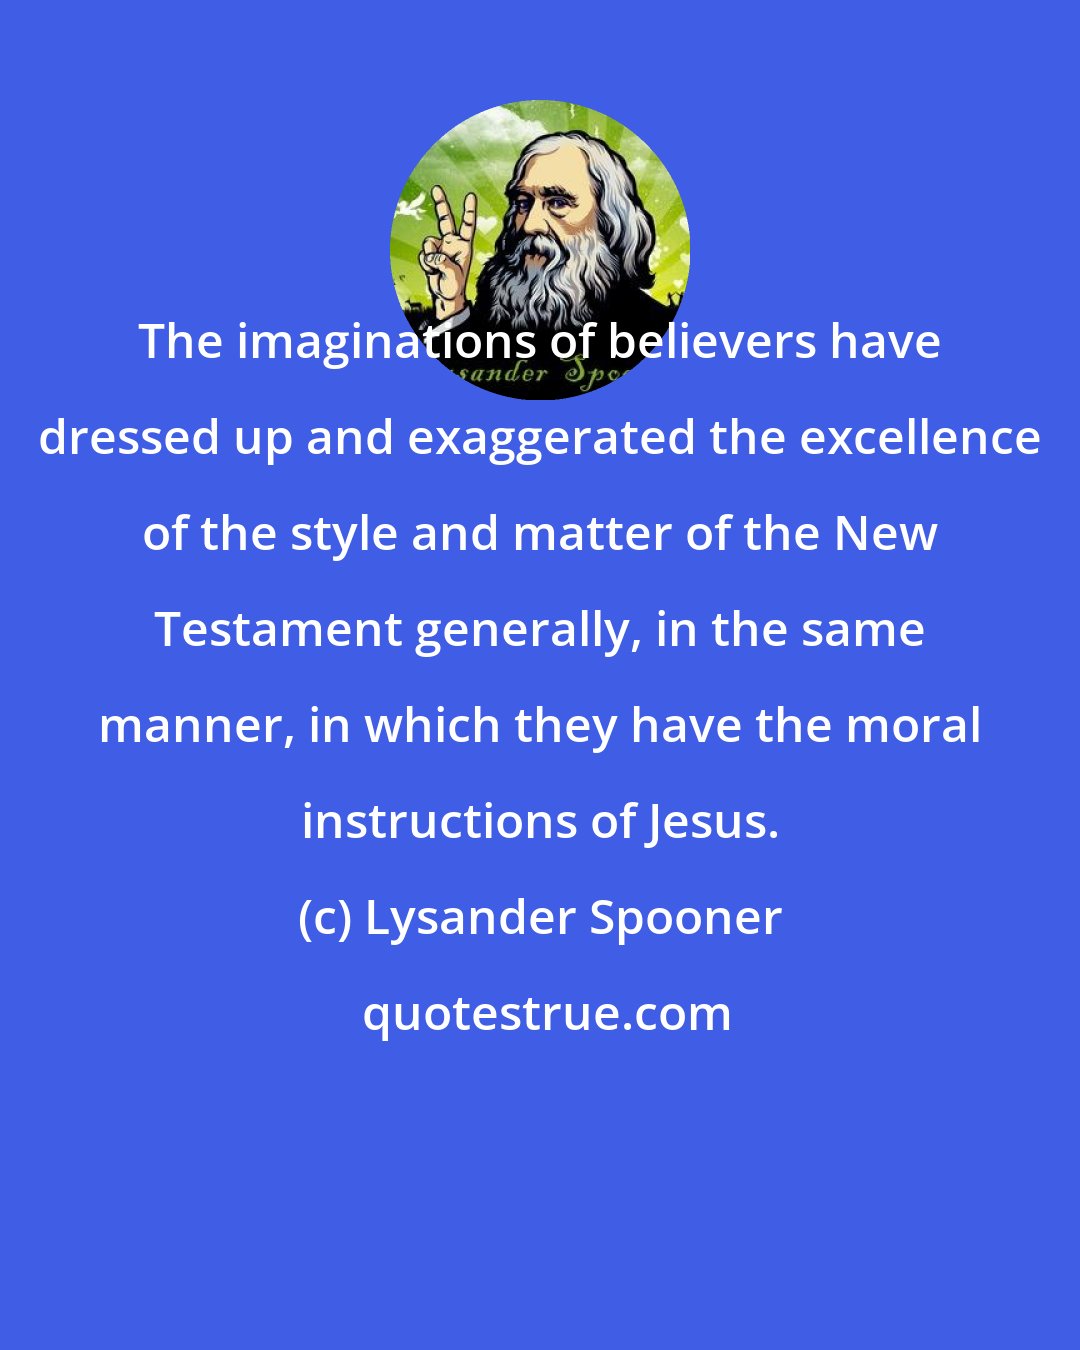 Lysander Spooner: The imaginations of believers have dressed up and exaggerated the excellence of the style and matter of the New Testament generally, in the same manner, in which they have the moral instructions of Jesus.